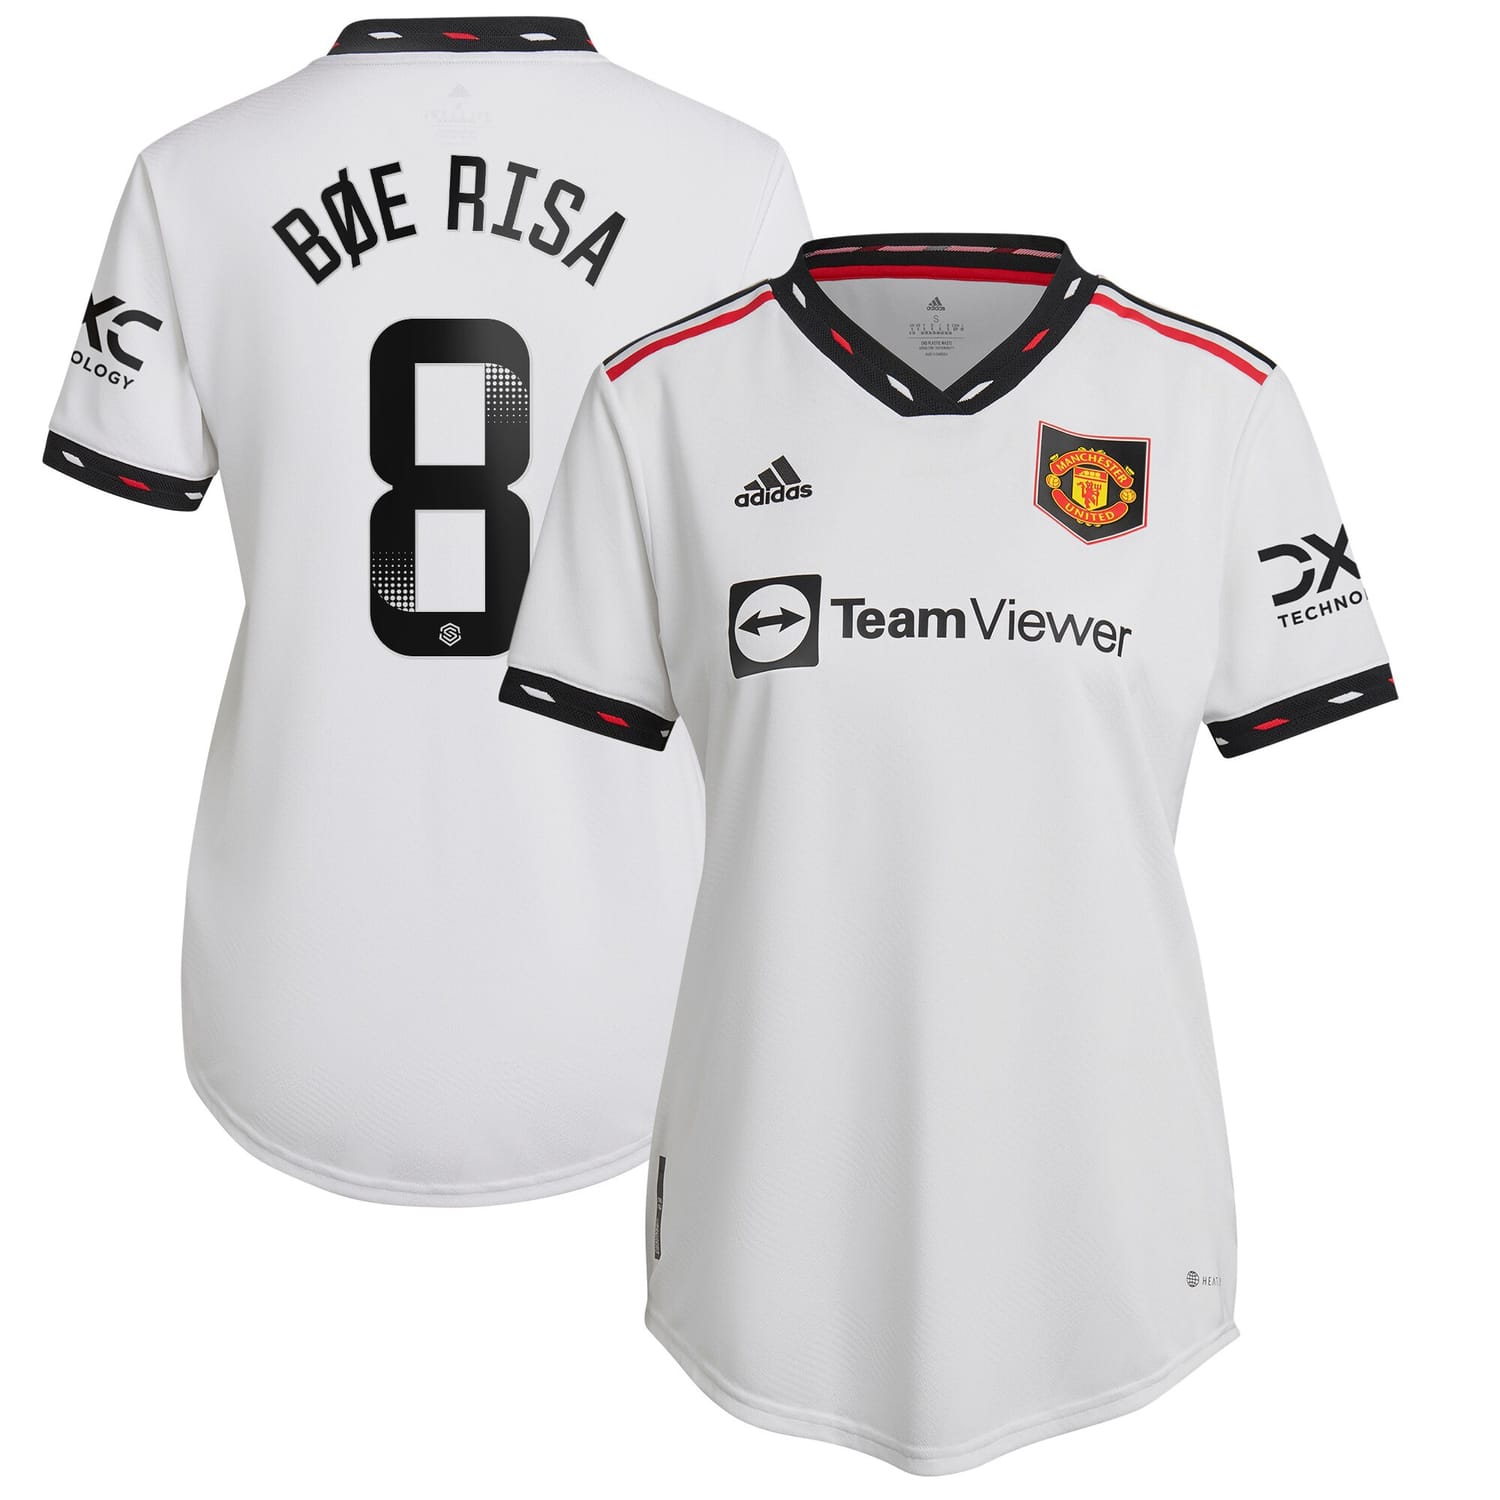 Premier League Manchester United Away WSL Authentic Jersey Shirt 2022-23 player Vilde Bøe Risa 8 printing for Women